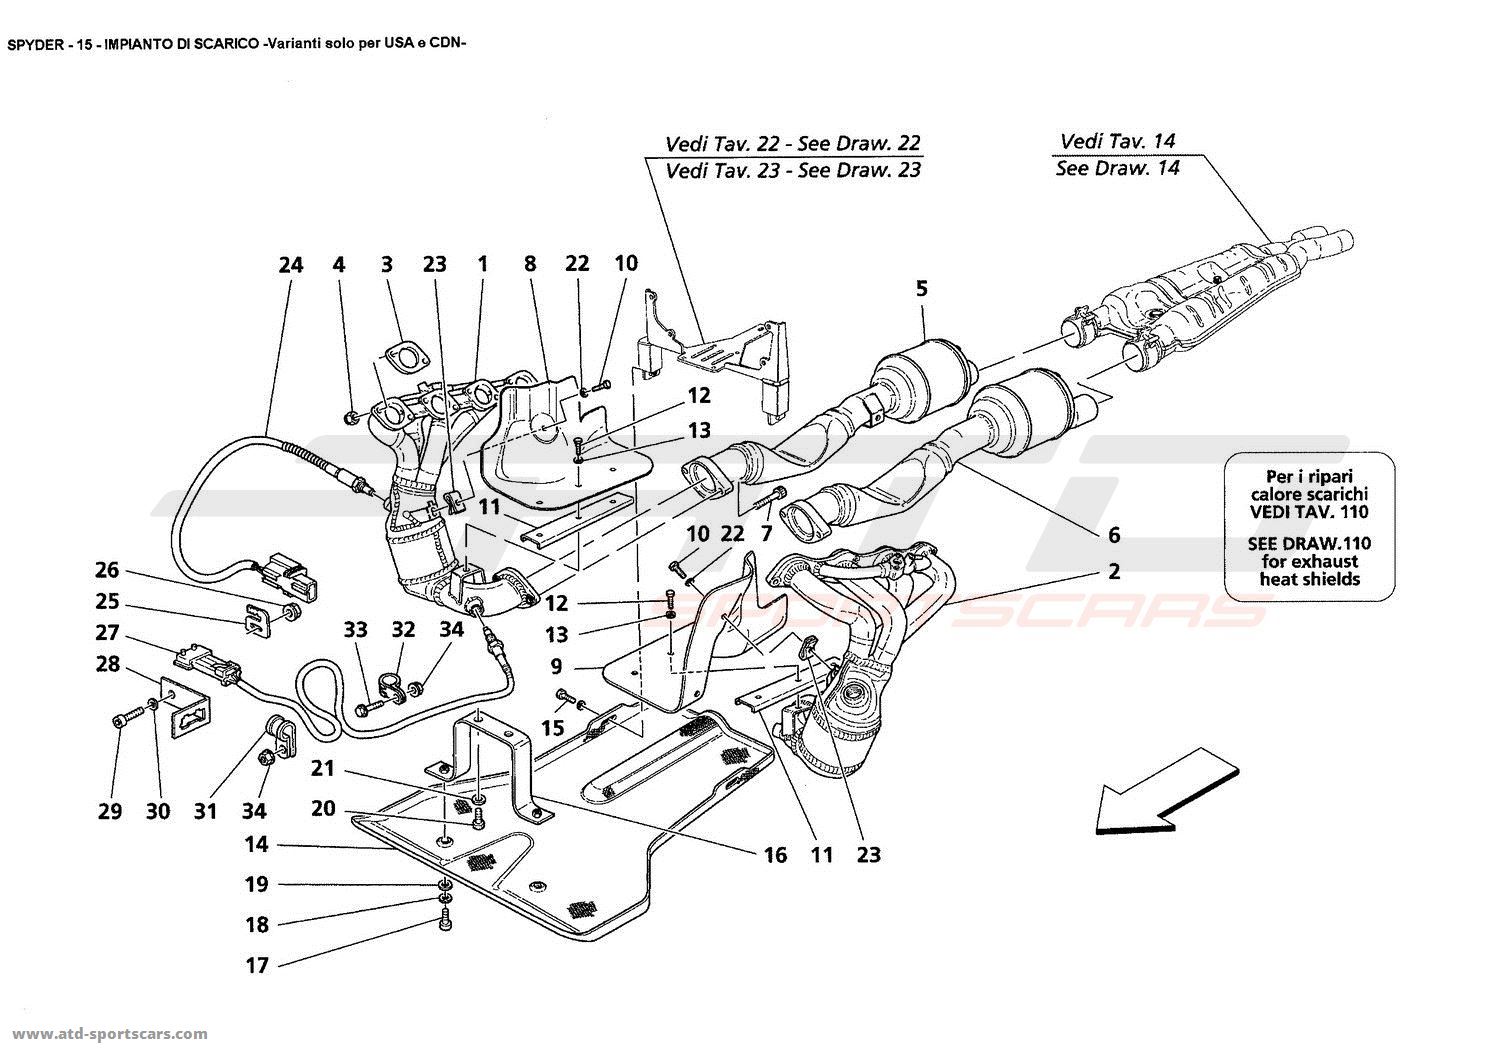 EXHAUST SYSTEM -Variations for USA and CDN-